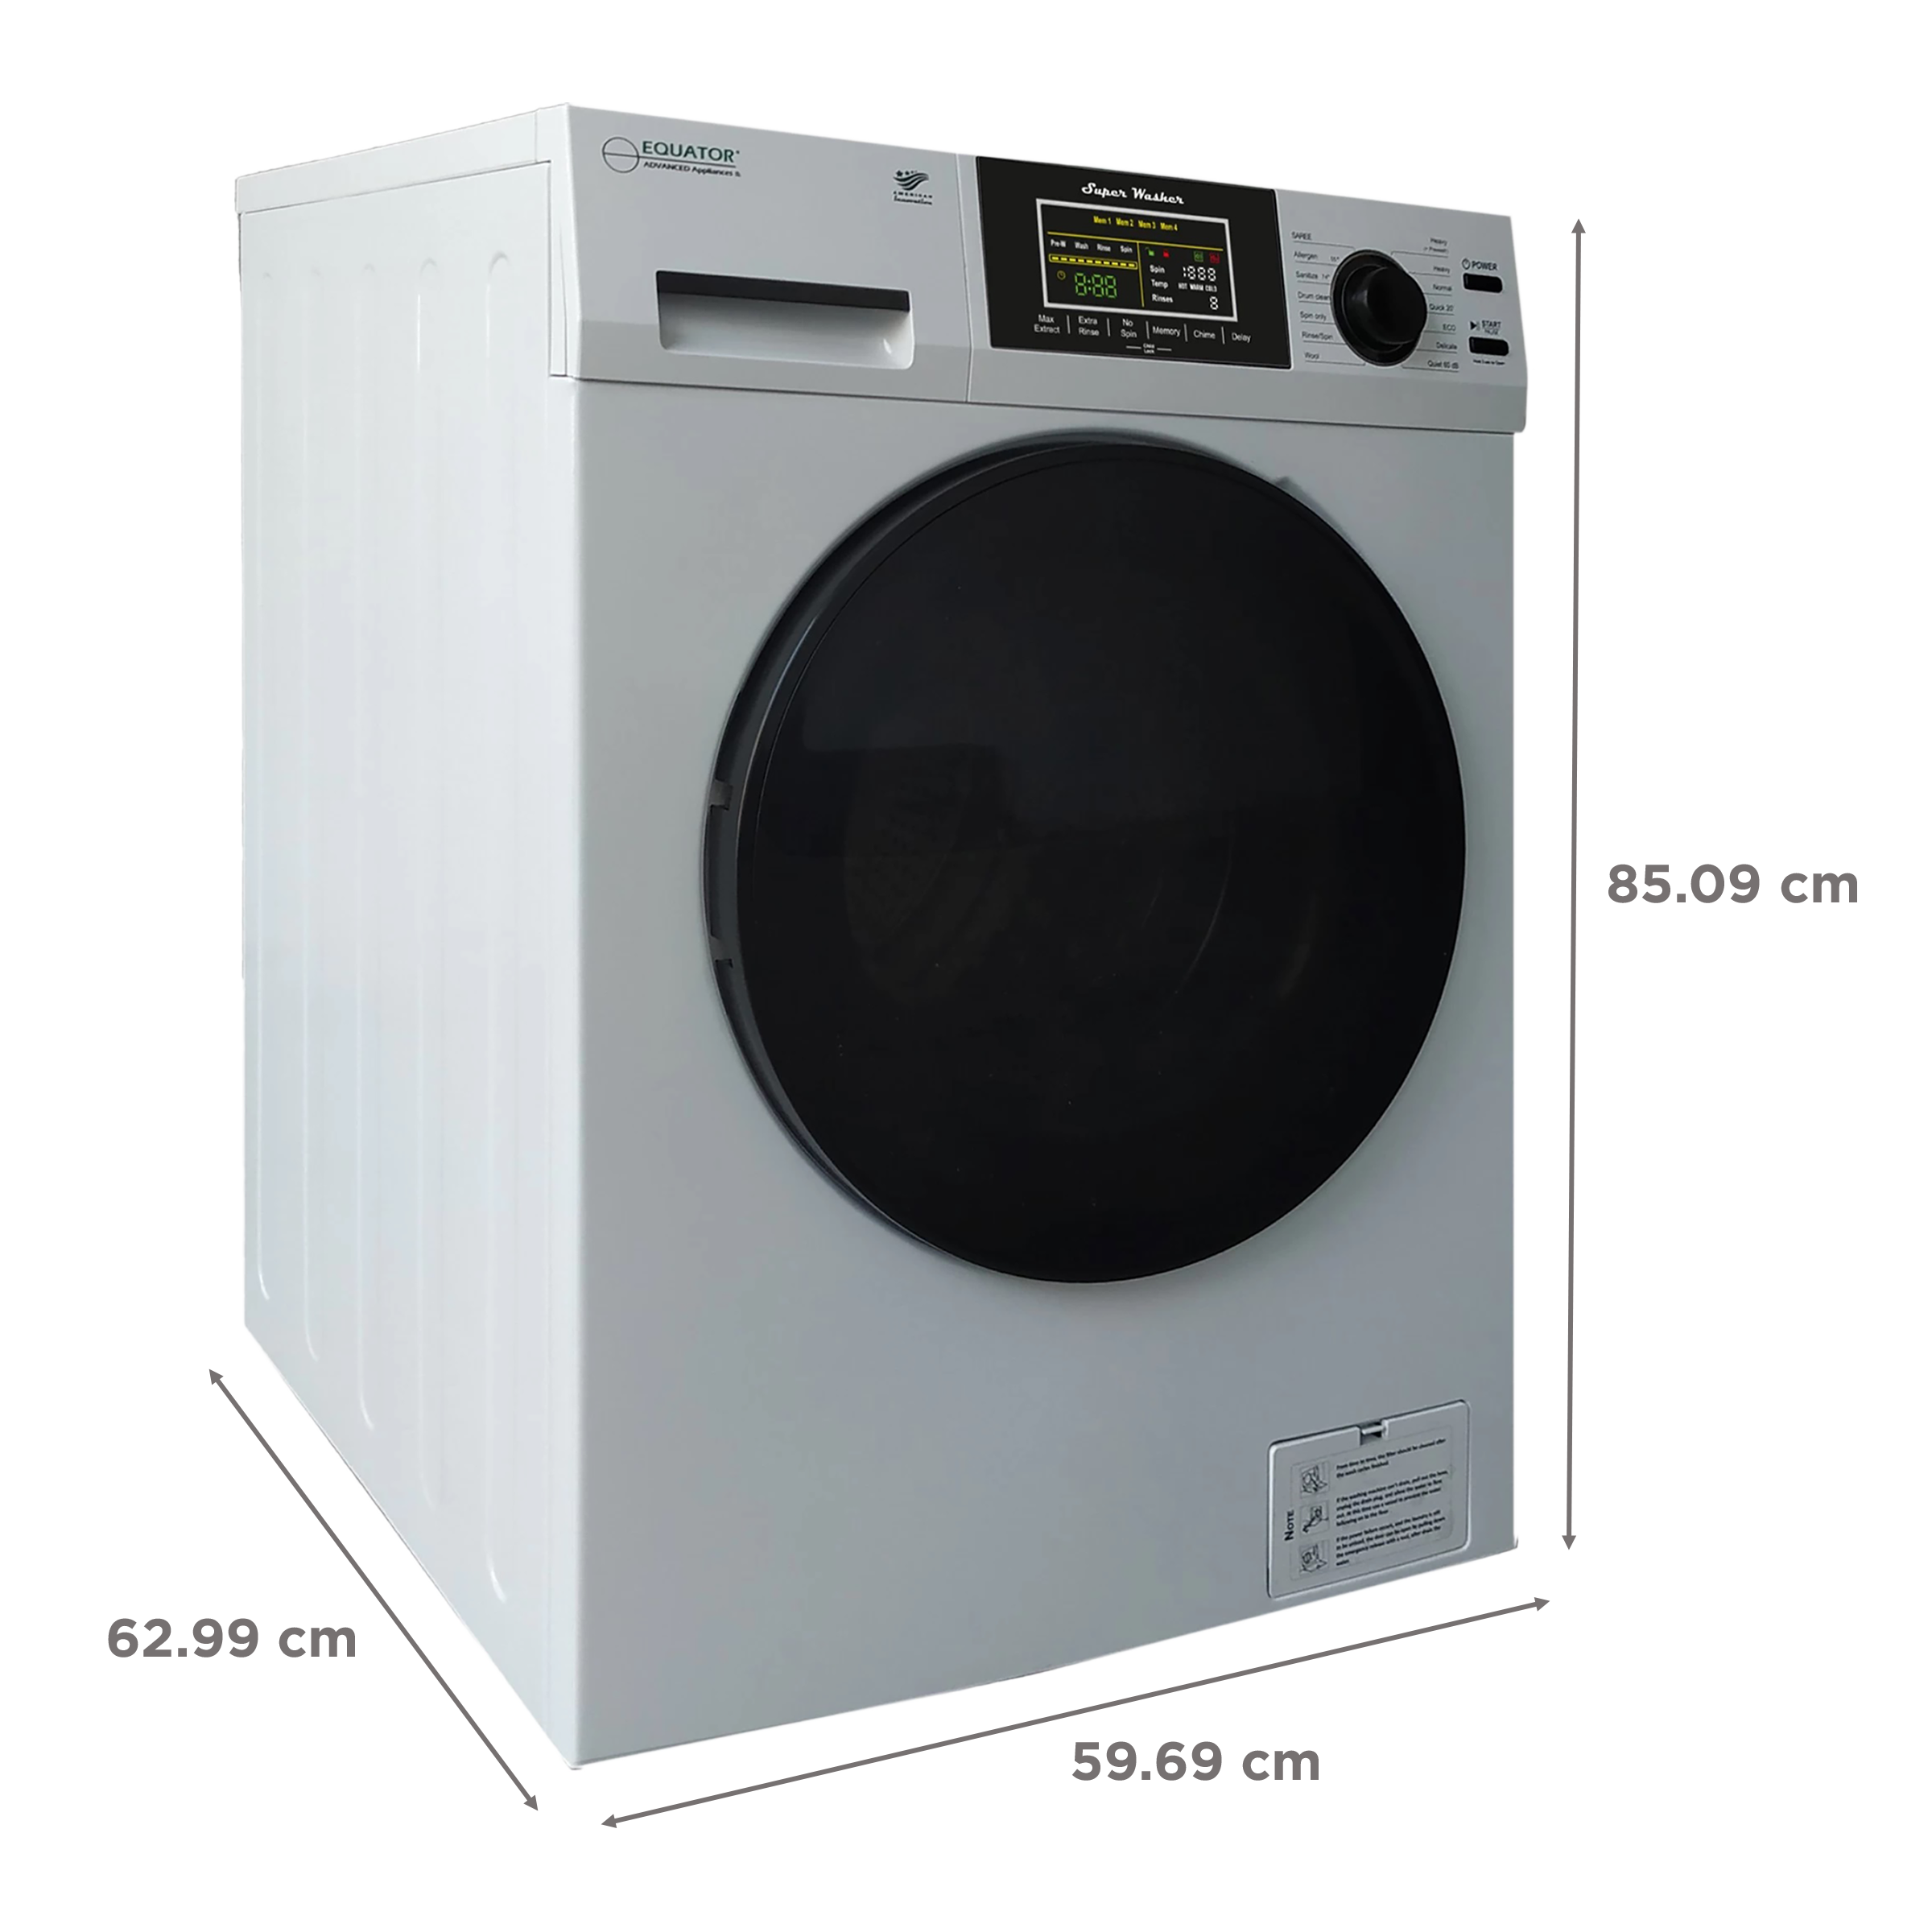 Equator 10.2 kg Fully Automatic Front Load Washing Machine (EW830, In-built Heater, White)_3